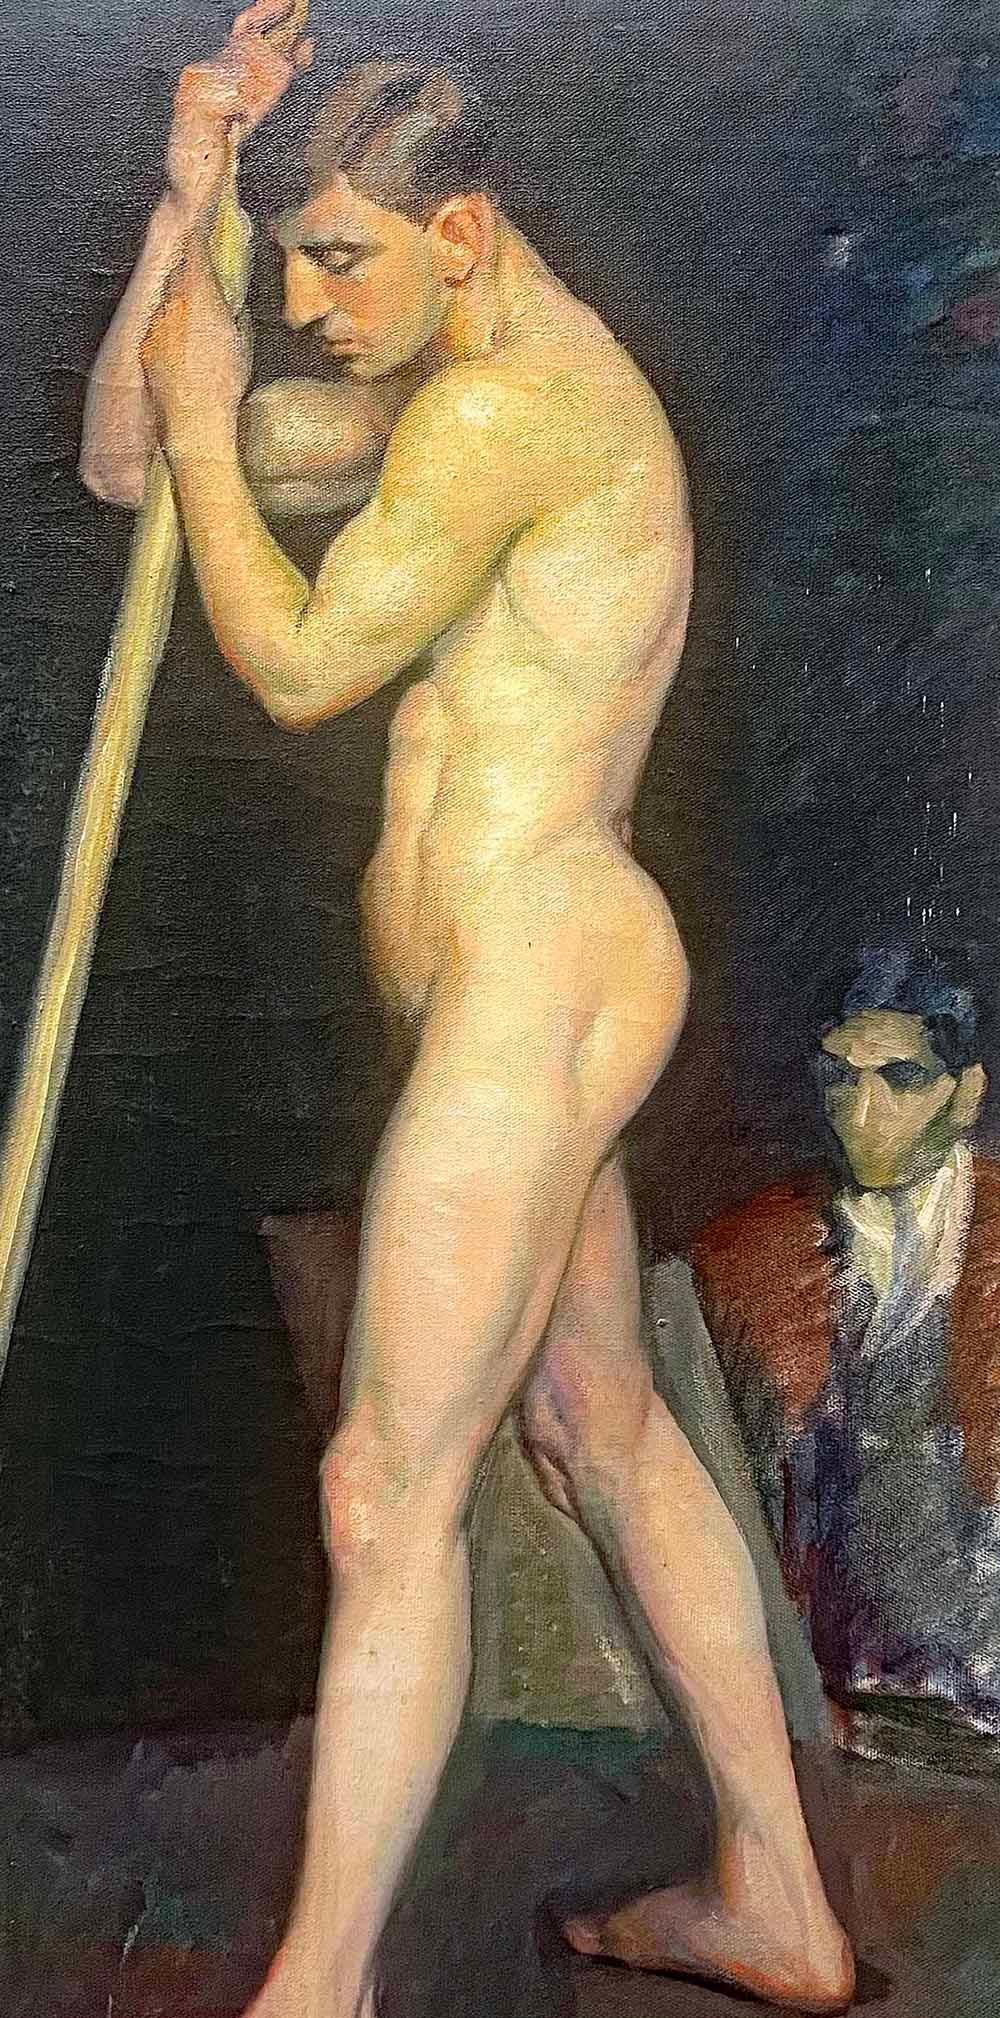 Sensitively painted with a rich but subdued palette and dramatic lighting, this large painting of a male youth leaning on a long pole was made by Sigvard Mohn, a Minnesota-born artist of Norwegian extraction. Little is known about his career, and